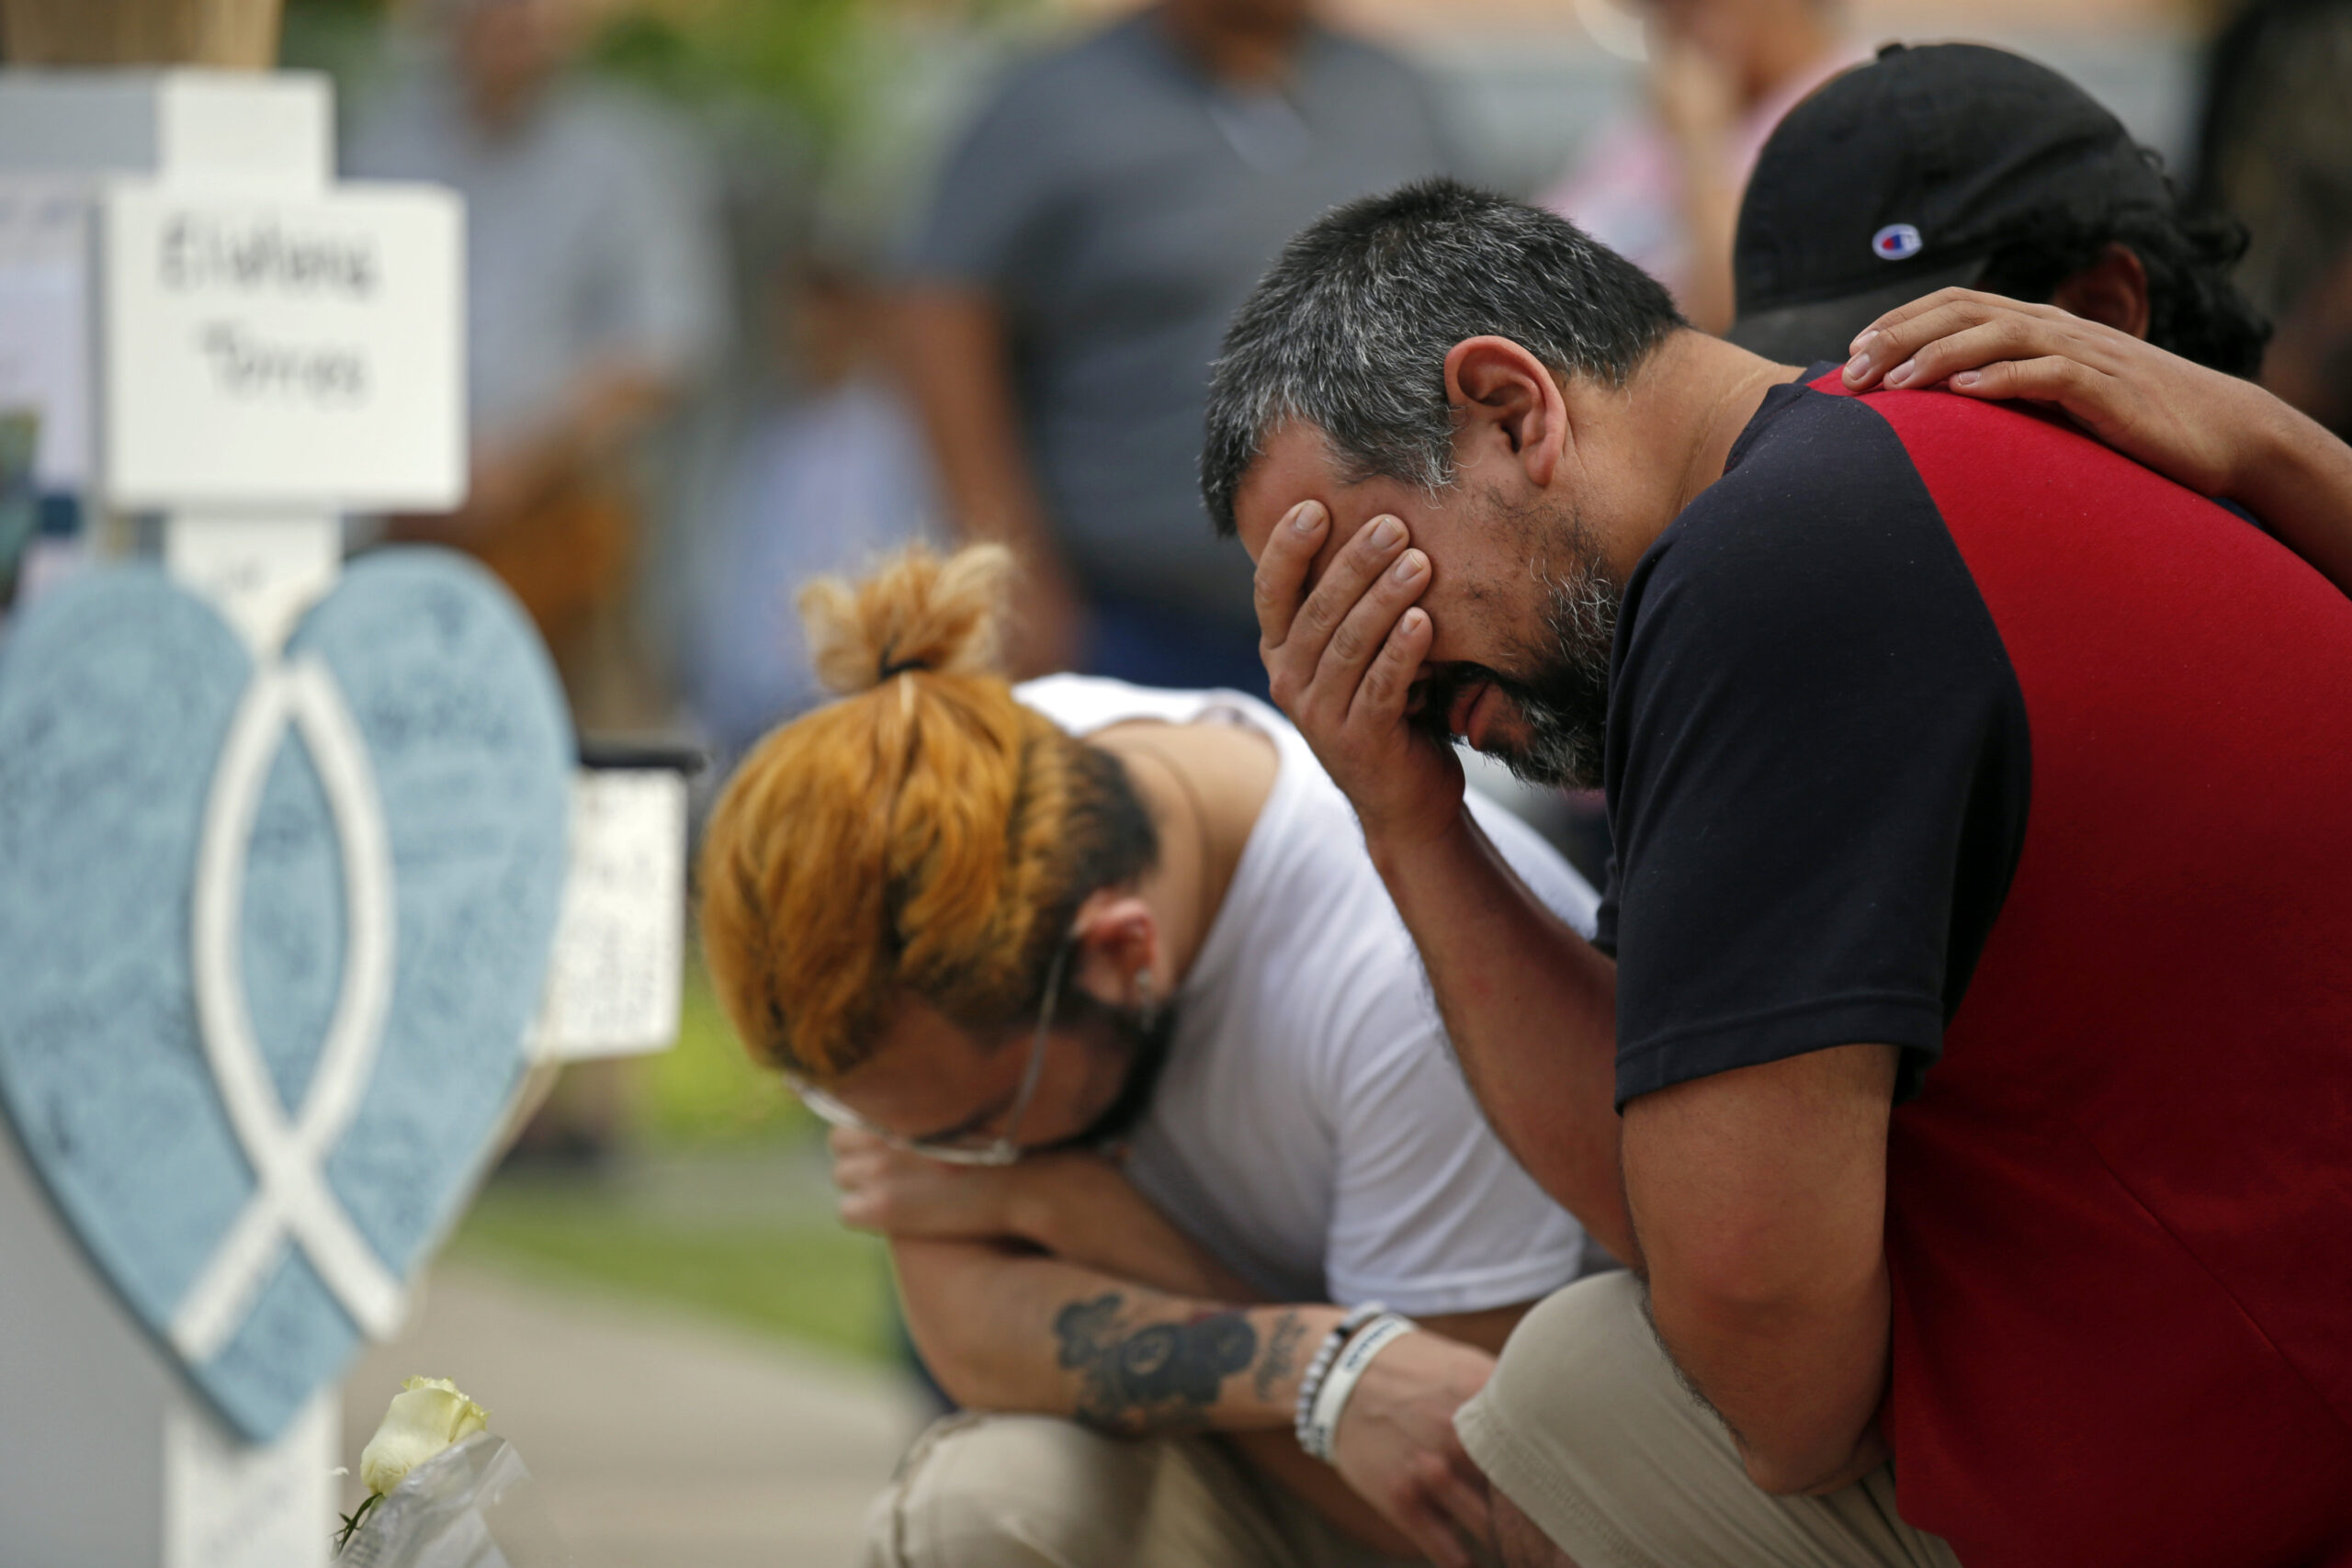 Vincent Salazar, right, father of Layla Salazar, weeps while kneeling in front of a cross with his daughter's name at a memorial site for the victims killed in this week's elementary school shooting in Uvalde, Texas, Friday, May 27, 2022. (AP Photo/Dario Lopez-Mills)